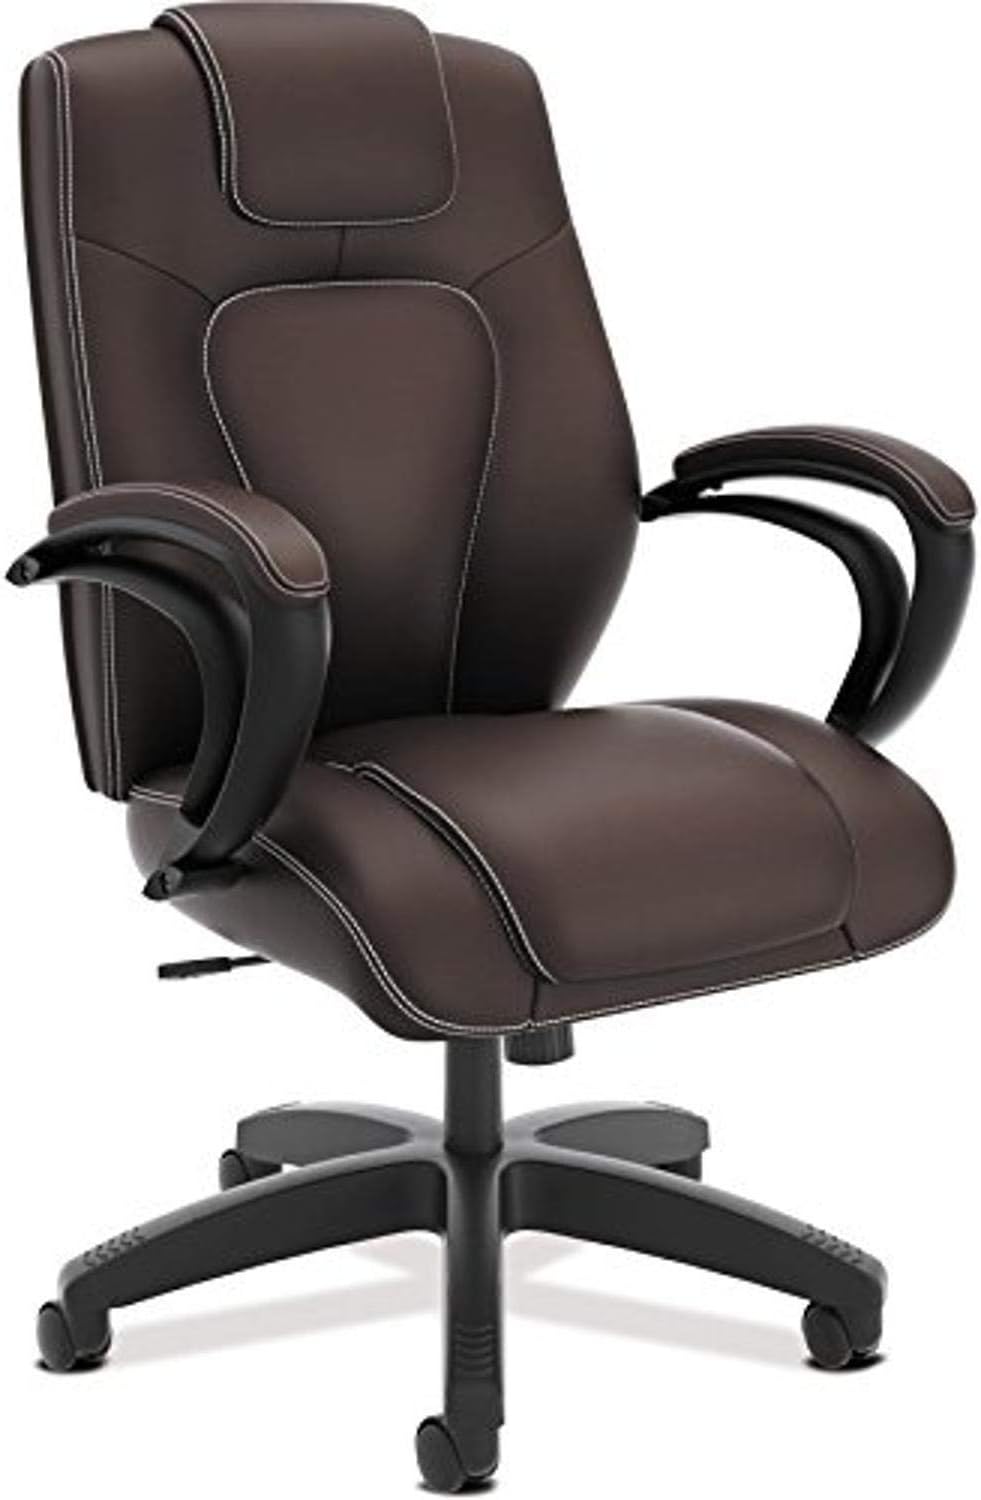 HON Managerial Office Chair- High-Back Computer Desk Chair with Loop Arms , Brown (VL402)